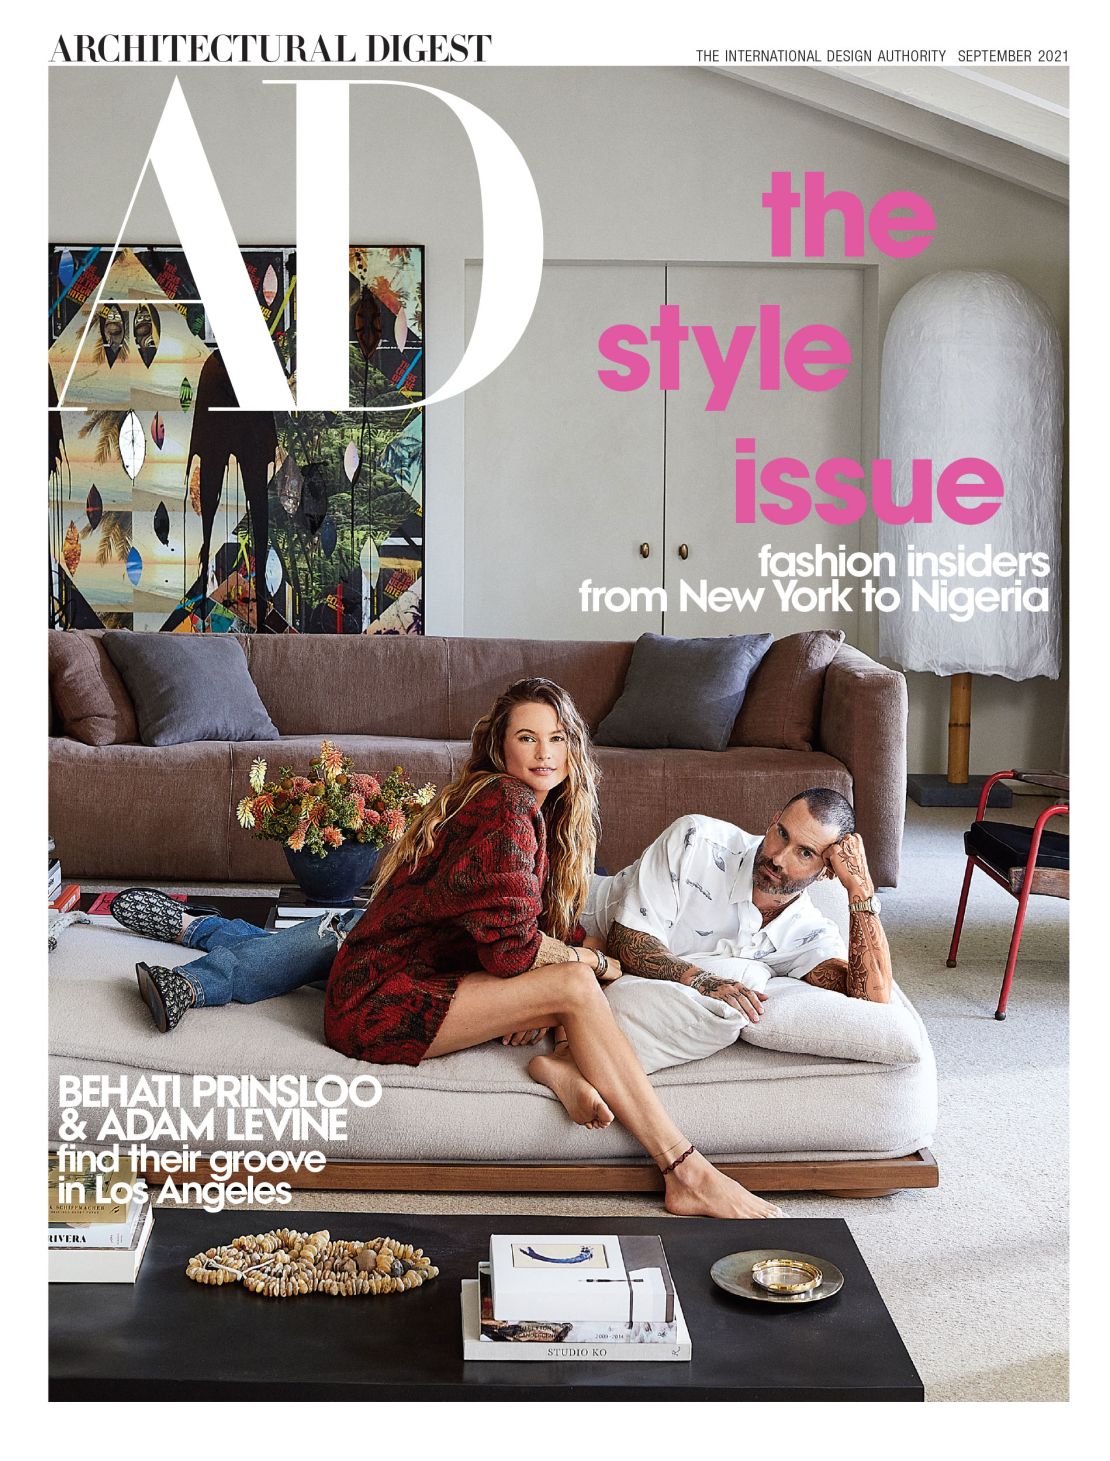 Behati Prinsloo and Adam Levine front the cover of Architectural Digest's September Style issue.